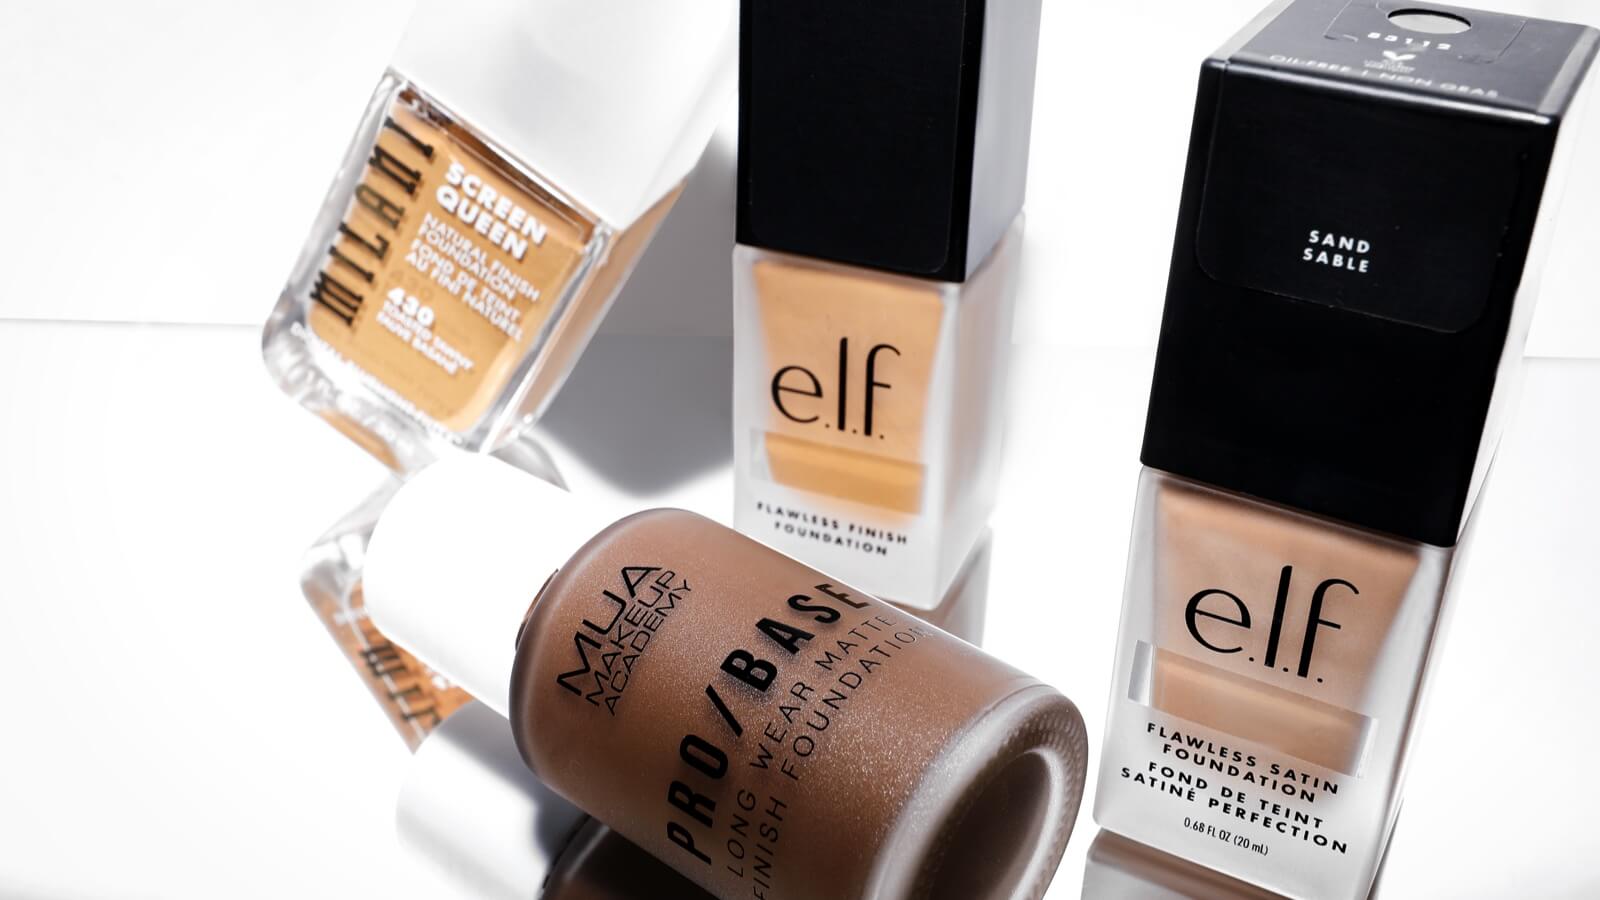 How To Find The Perfect Foundation Match Online - Beauty Bay Edited